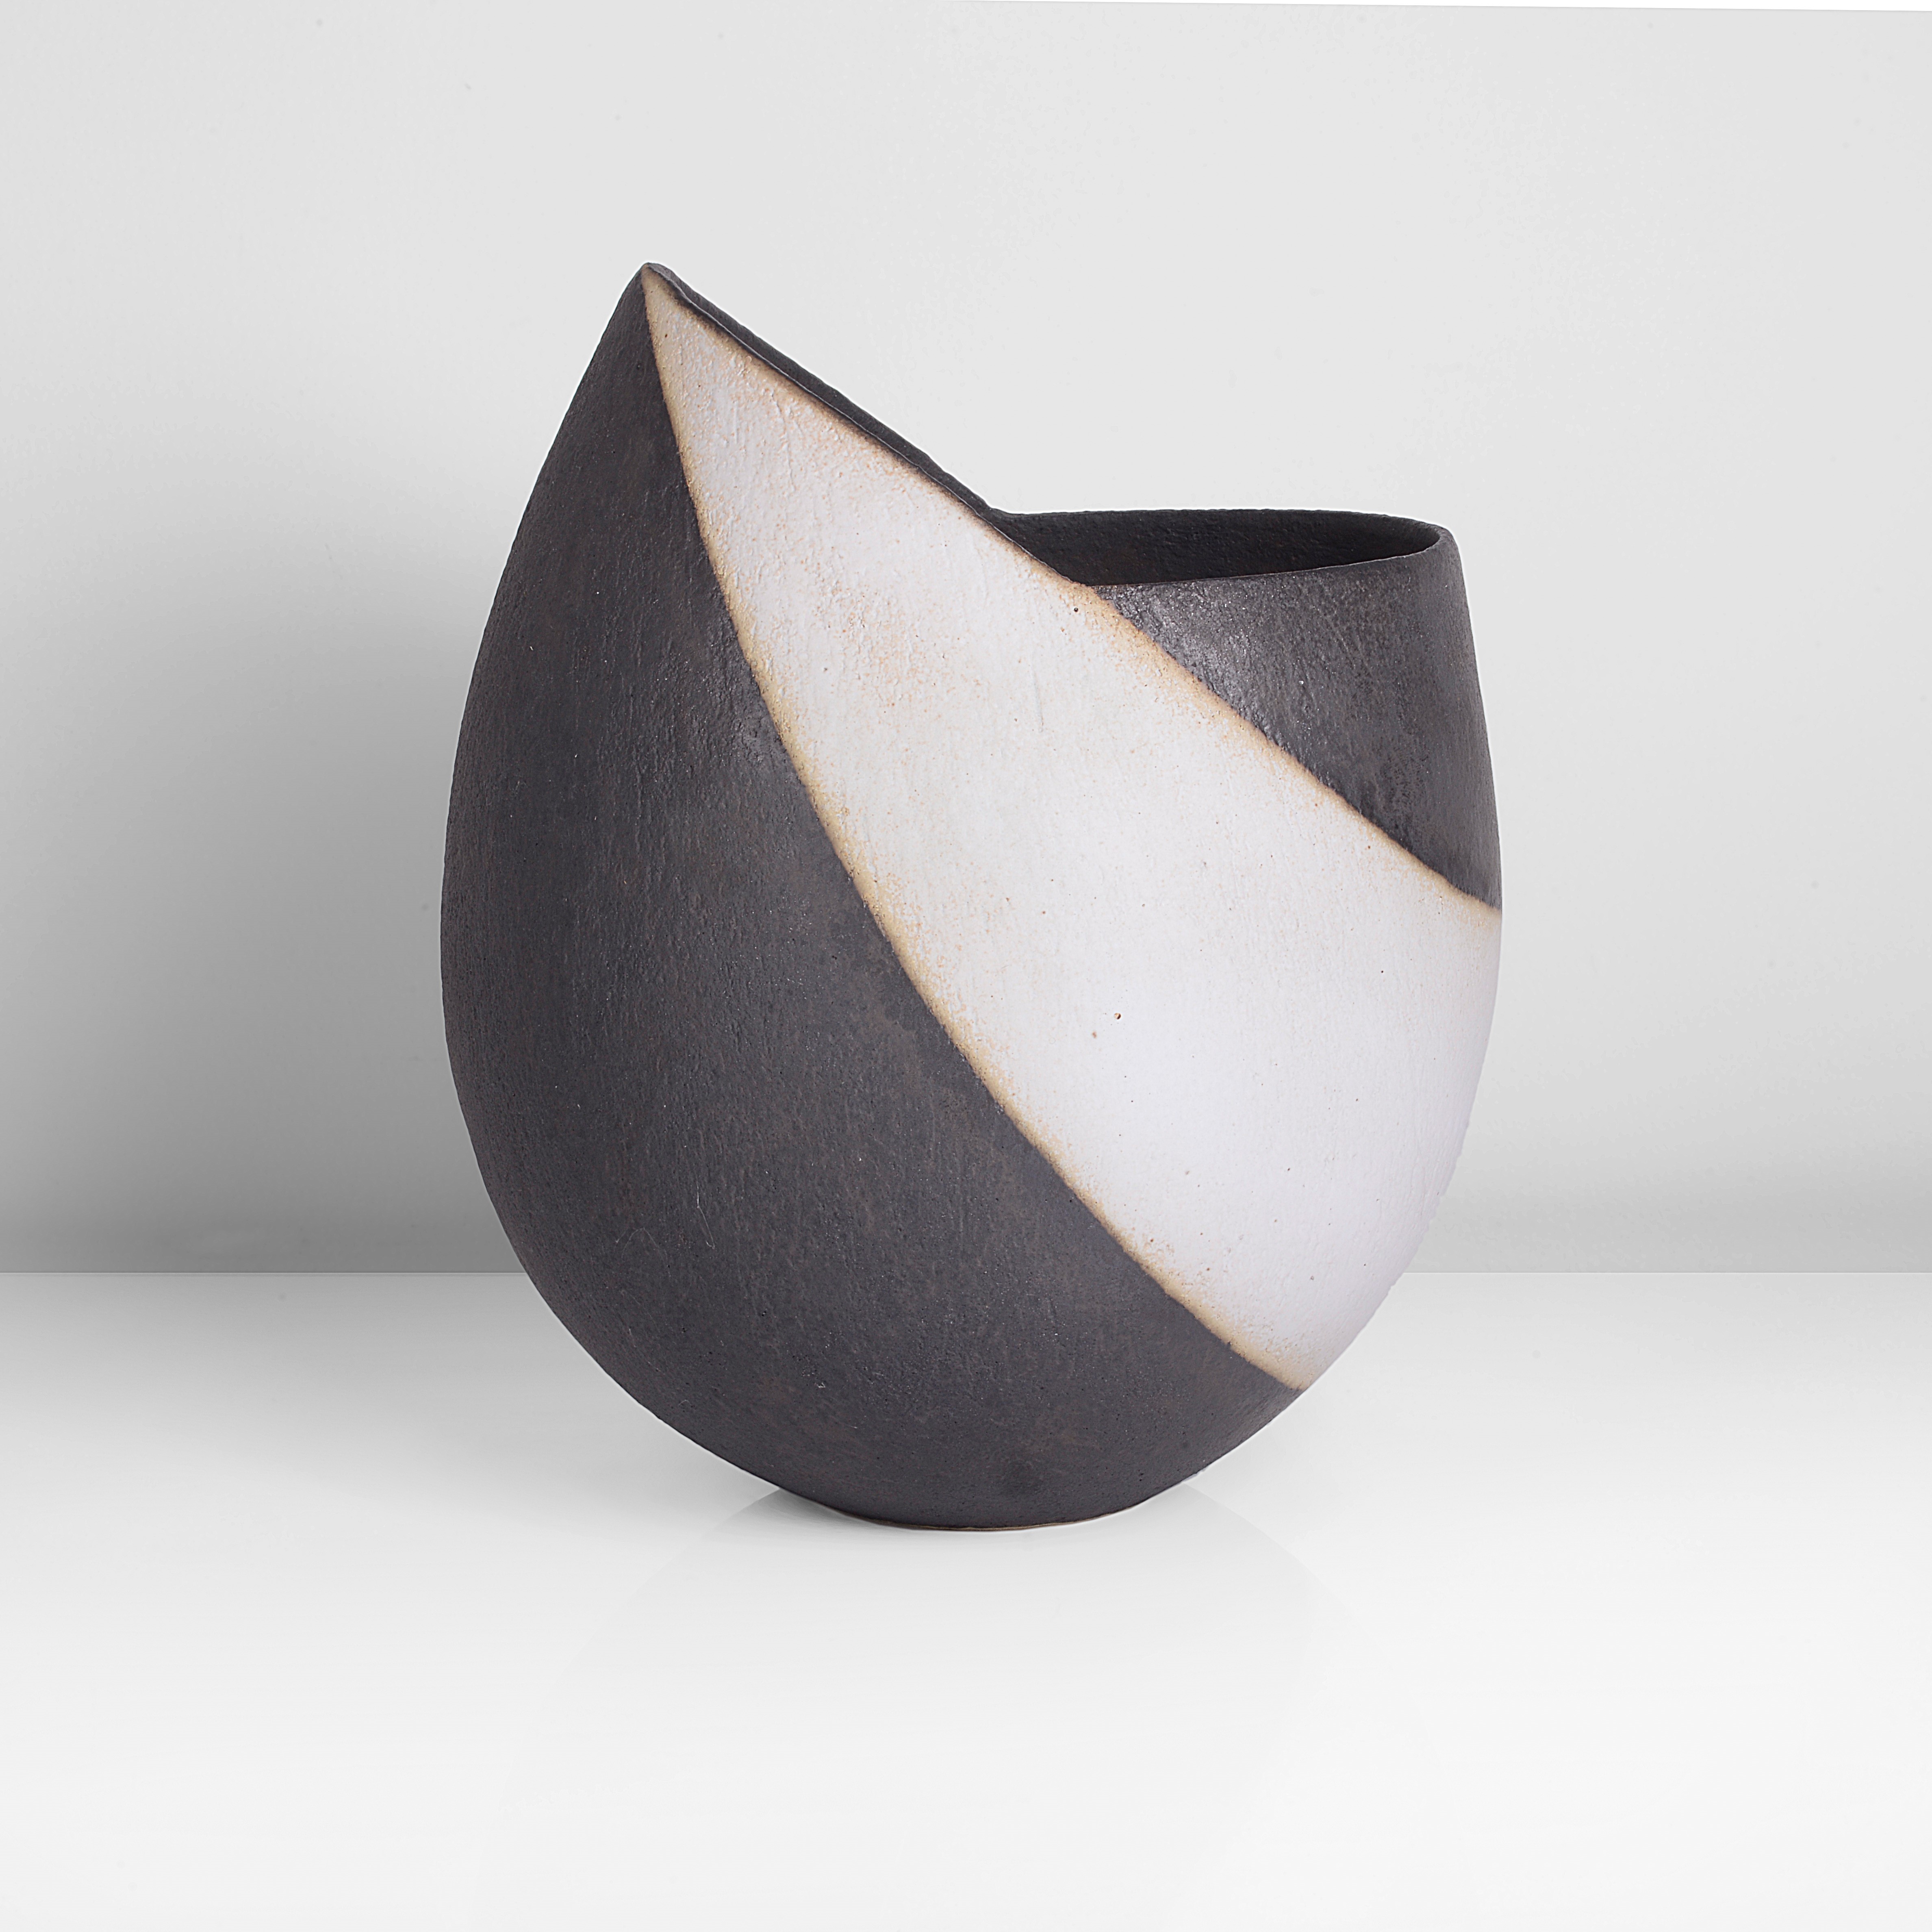 A black and white stoneware vessel made by John Ward in circa 1990 sold at auction by Maak Contemporary Ceramics